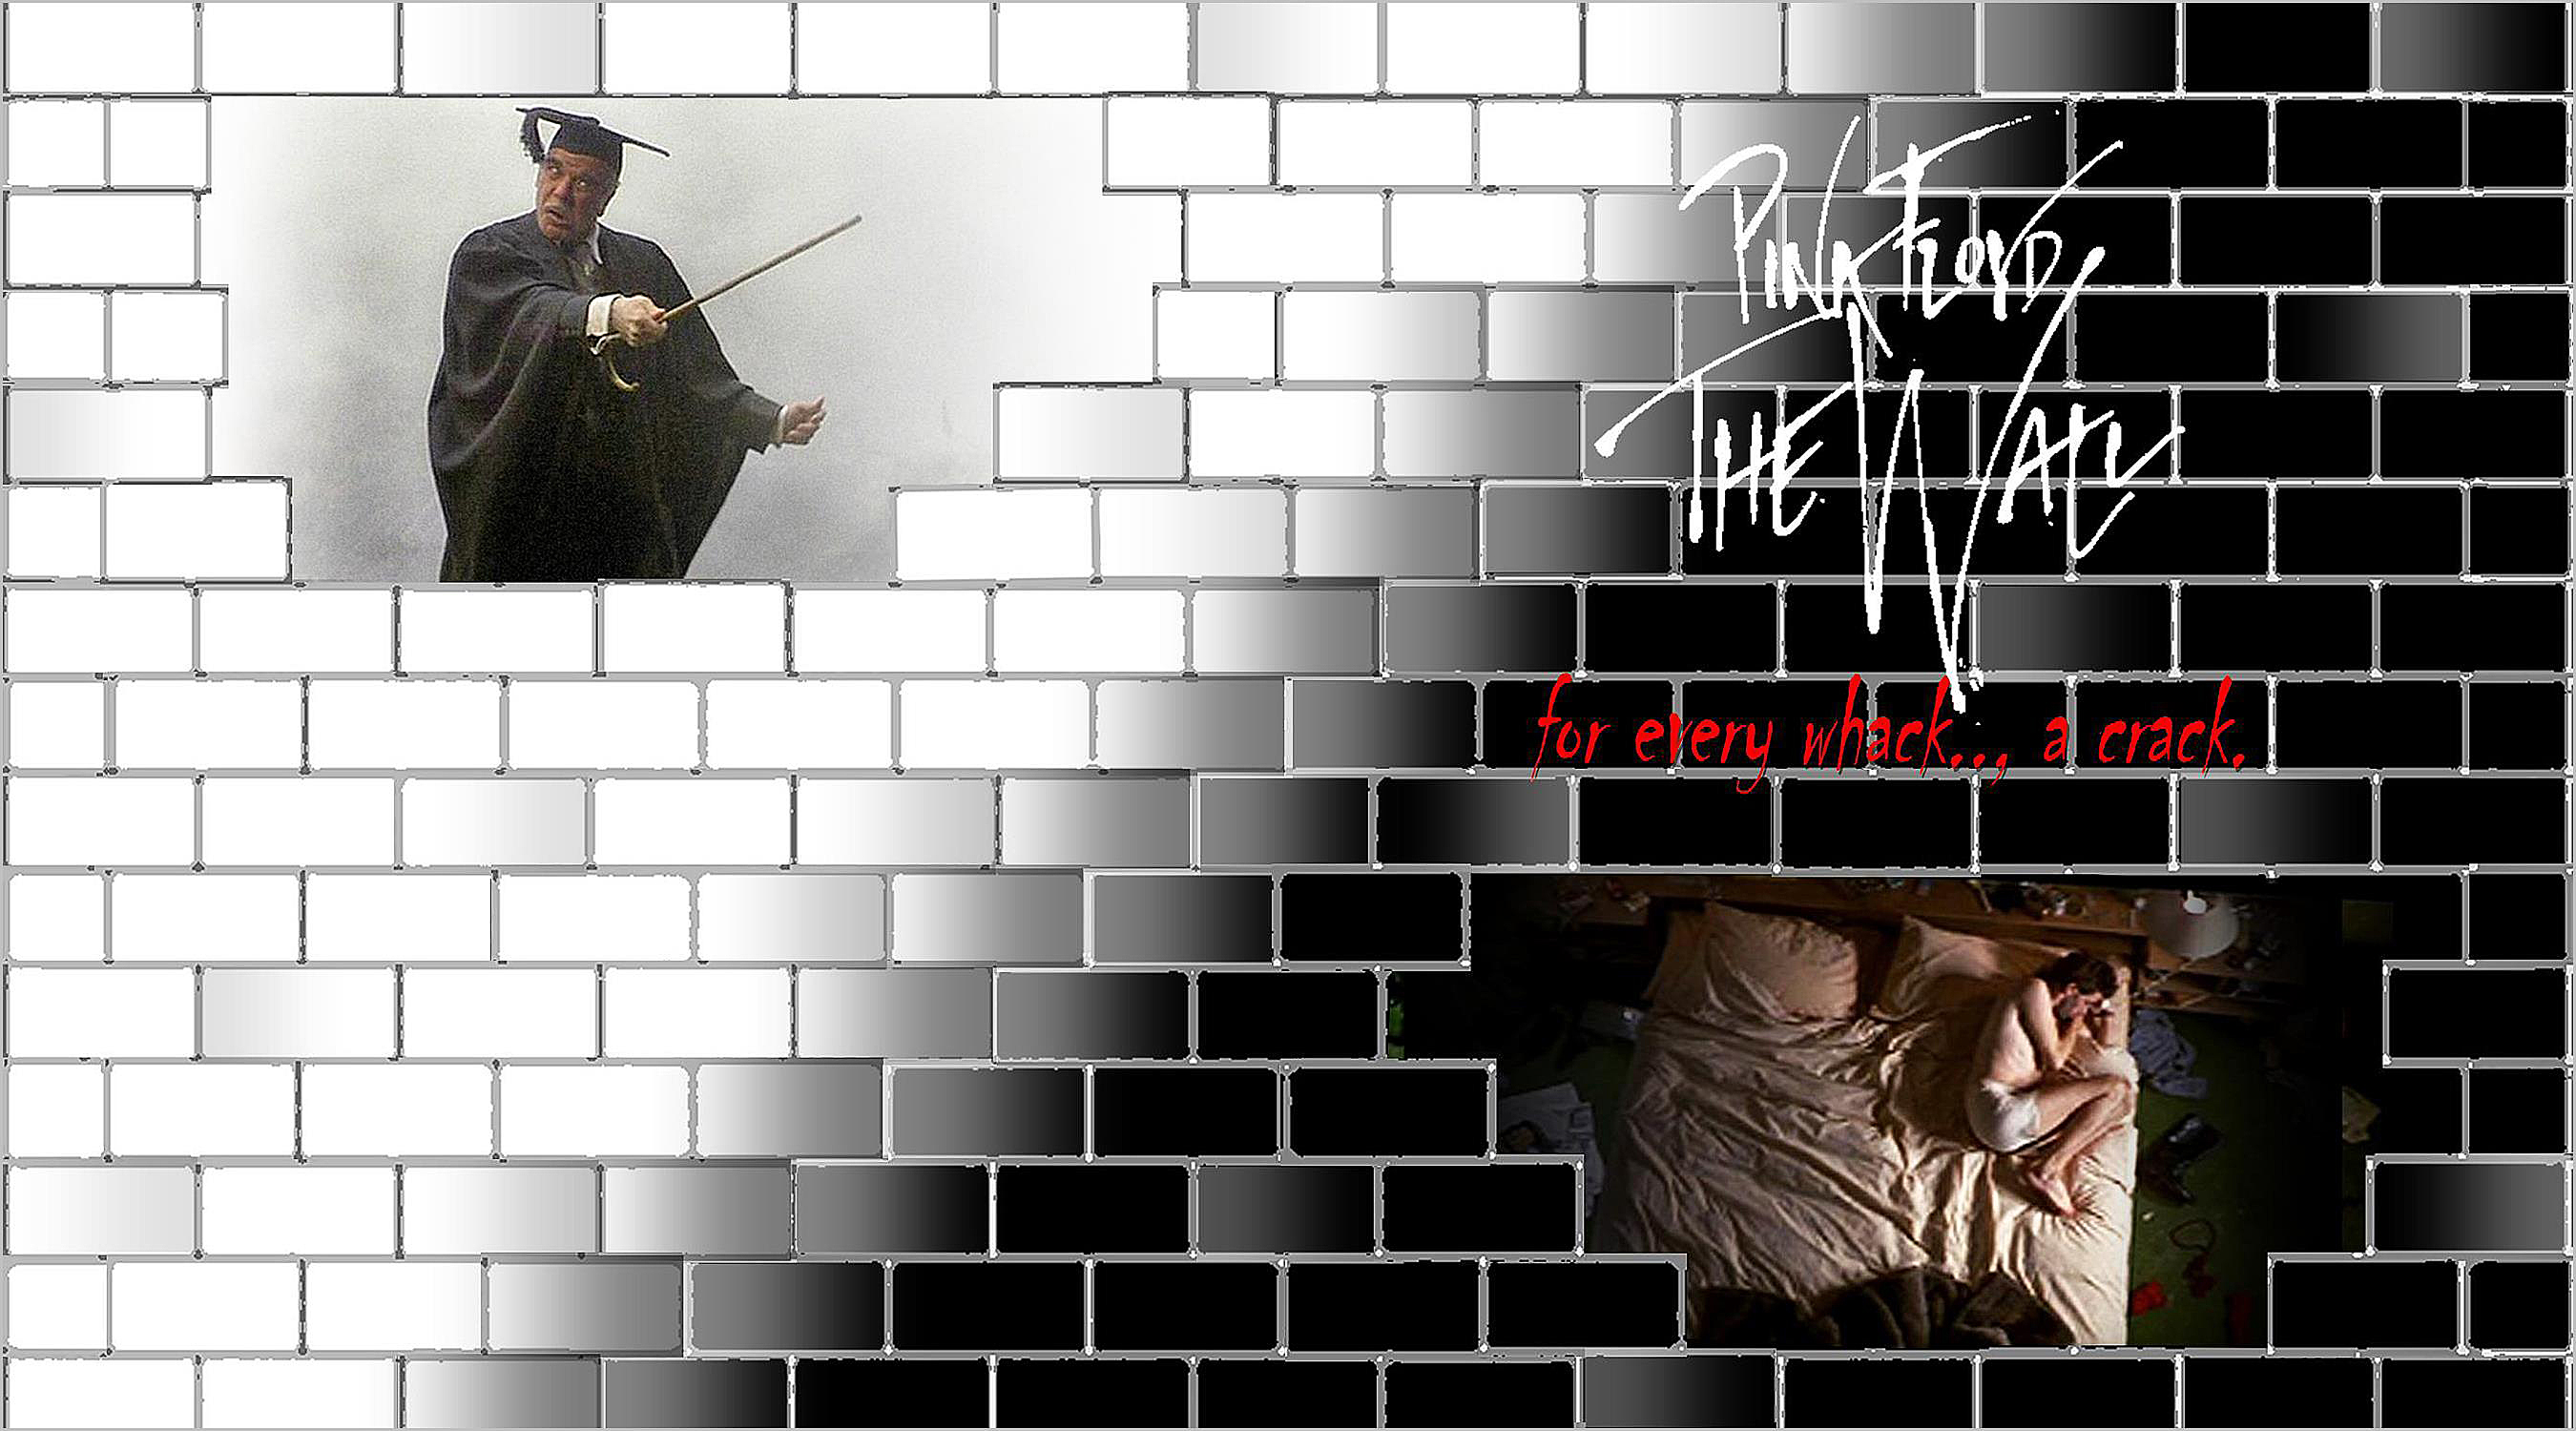 0023 - Pink Floyd - The Wall by sunsetcolors on DeviantArt